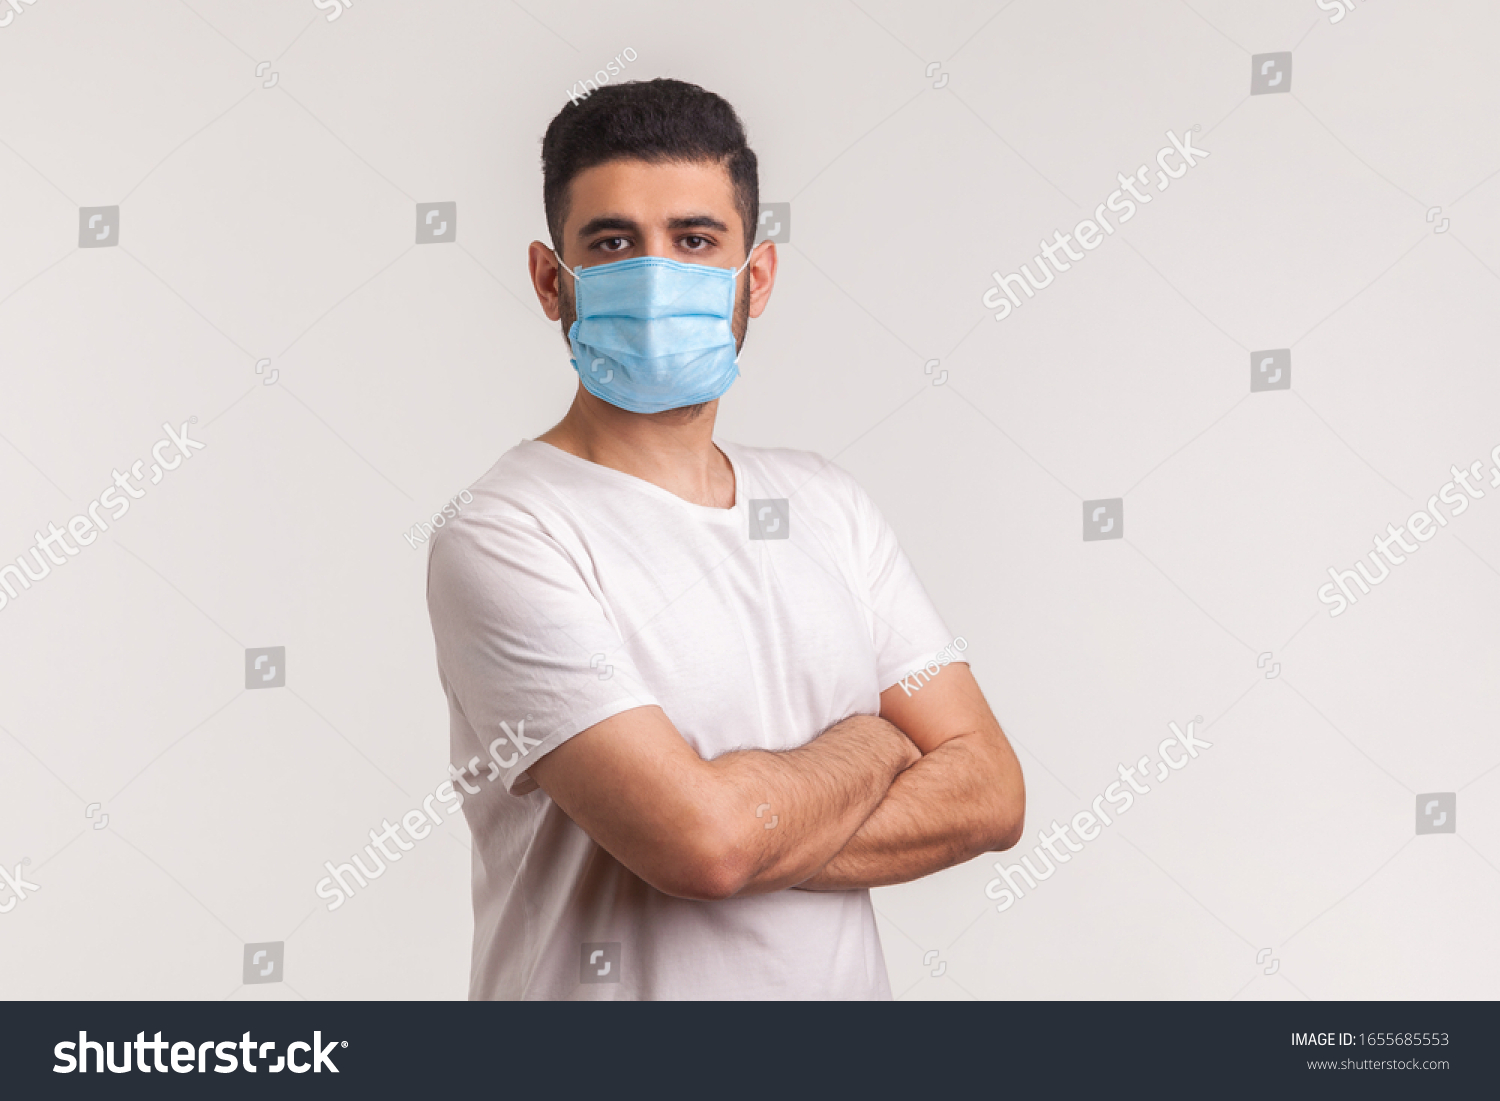 Effective protection against coronavirus. Man holding hands crossed and wearing hygienic mask to prevent infection, respiratory illness such as flu, 2019-nCoV, Covid-19. indoor studio shot, white back #1655685553